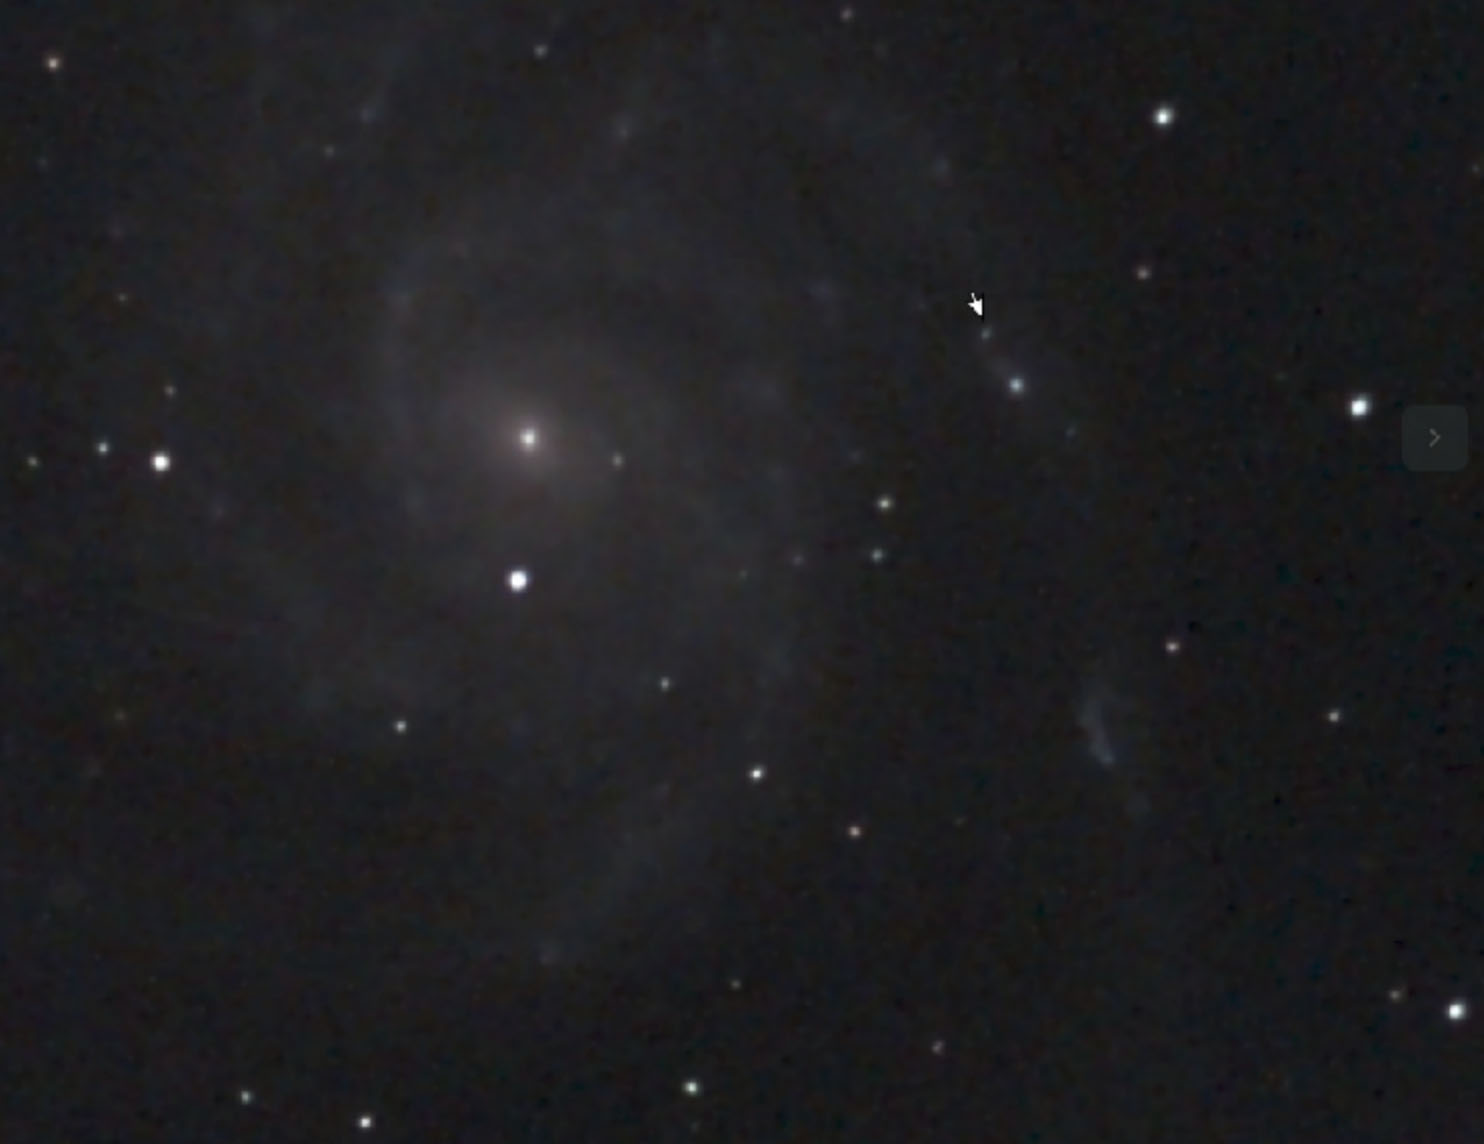 A photo of outerspace, black with a vague white swirl on the top right that covers most of the image. There are white little dots spread throughout.